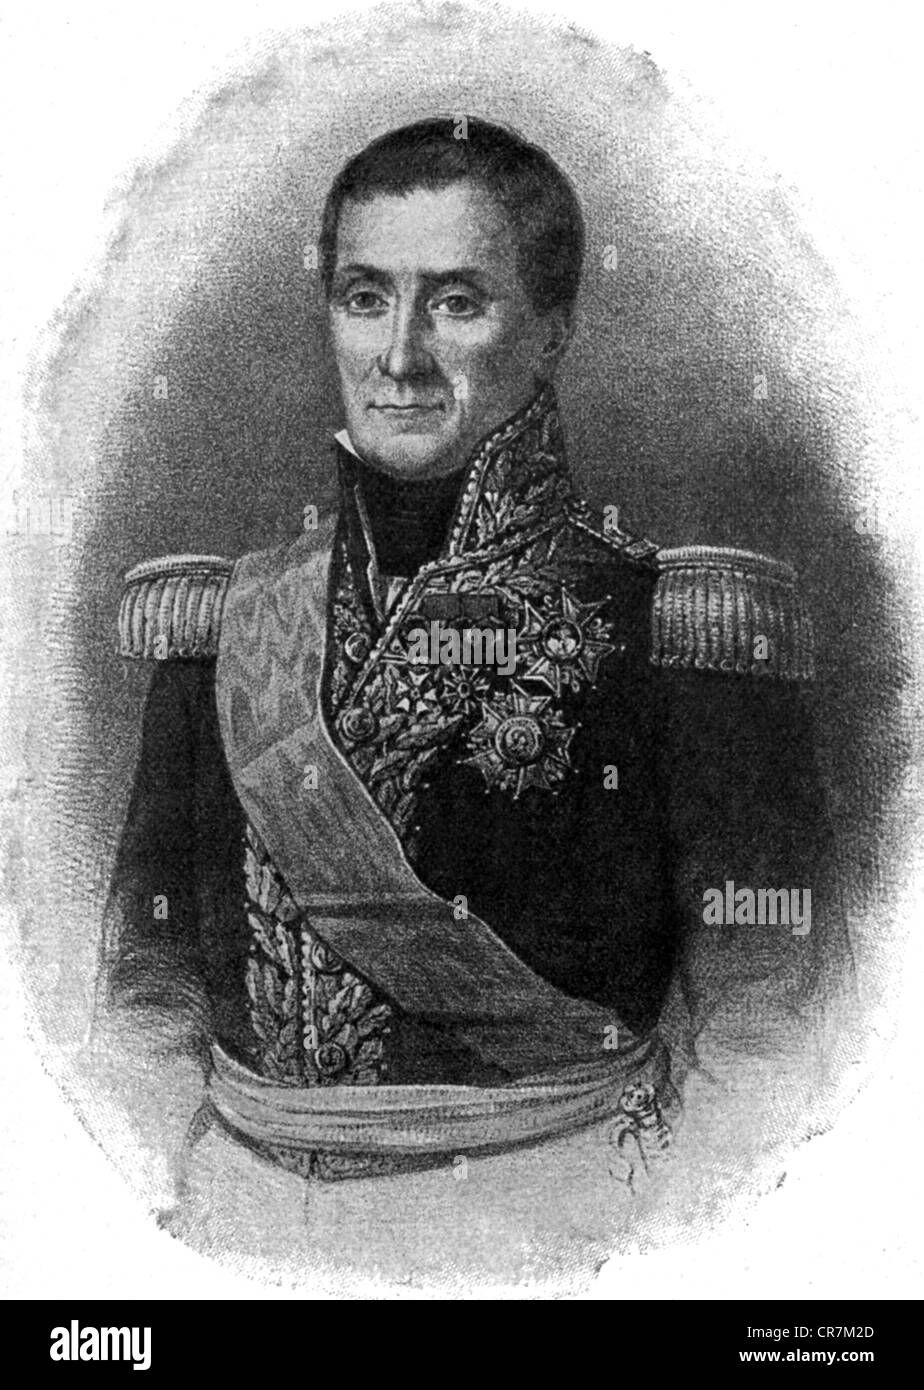 Burgues de Missiessy, Edouard Jacques, 1754 - 24.3.1837, French admiral, half length, lithograph by Jeremie Fuhr, 1832, Stock Photo